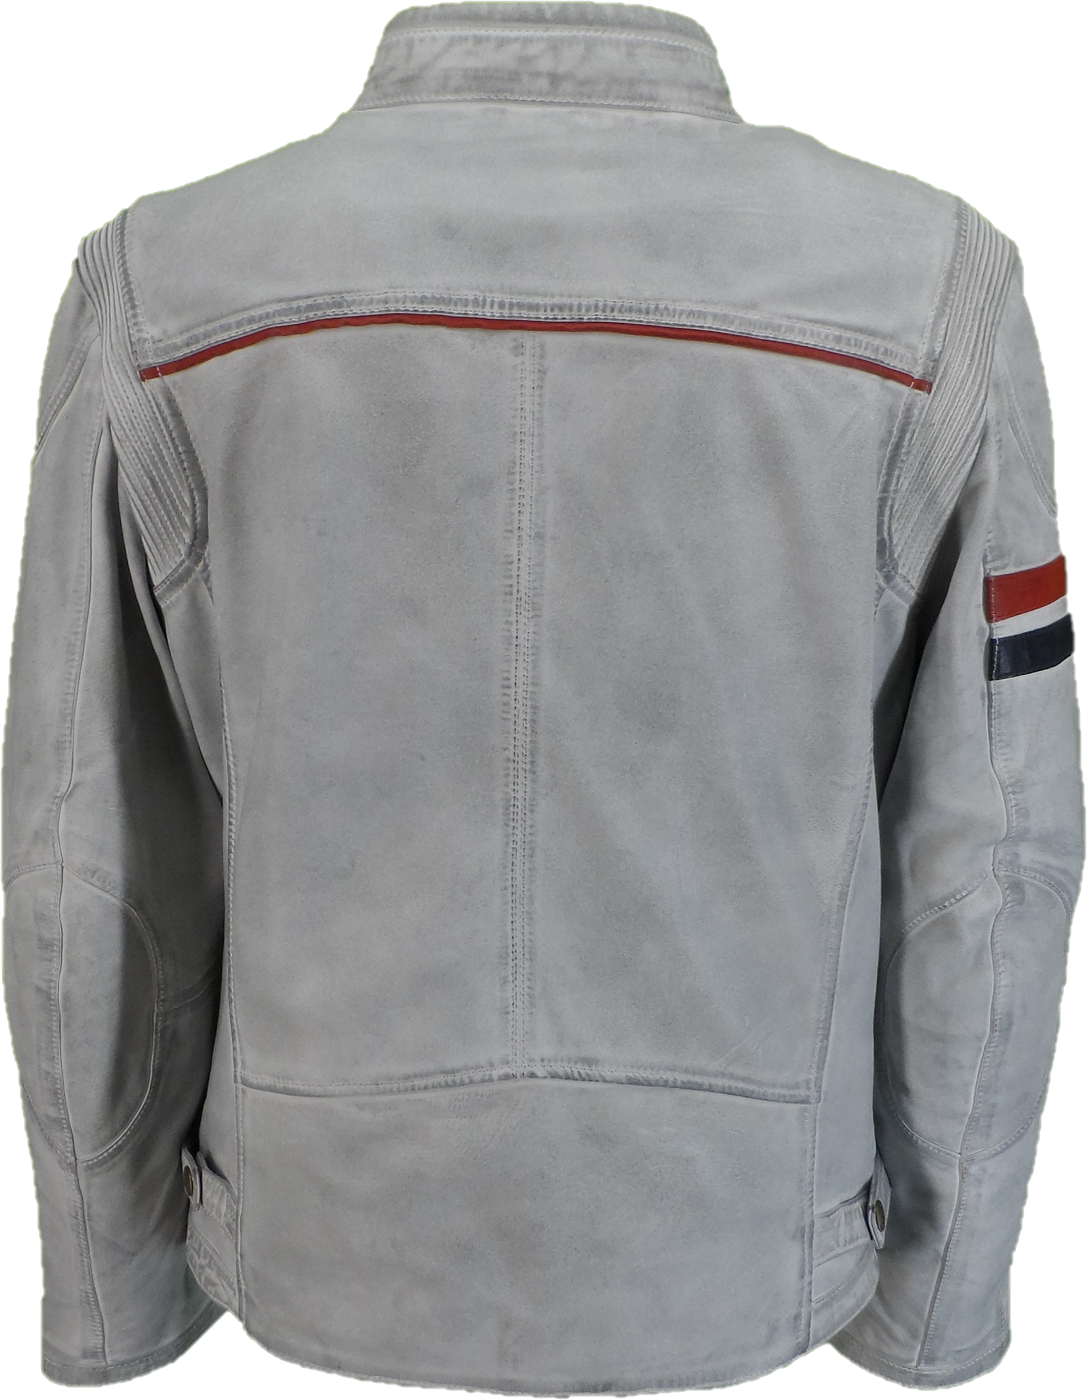 Gabicci Mens White/Blue/Red Leather Rally Jacket